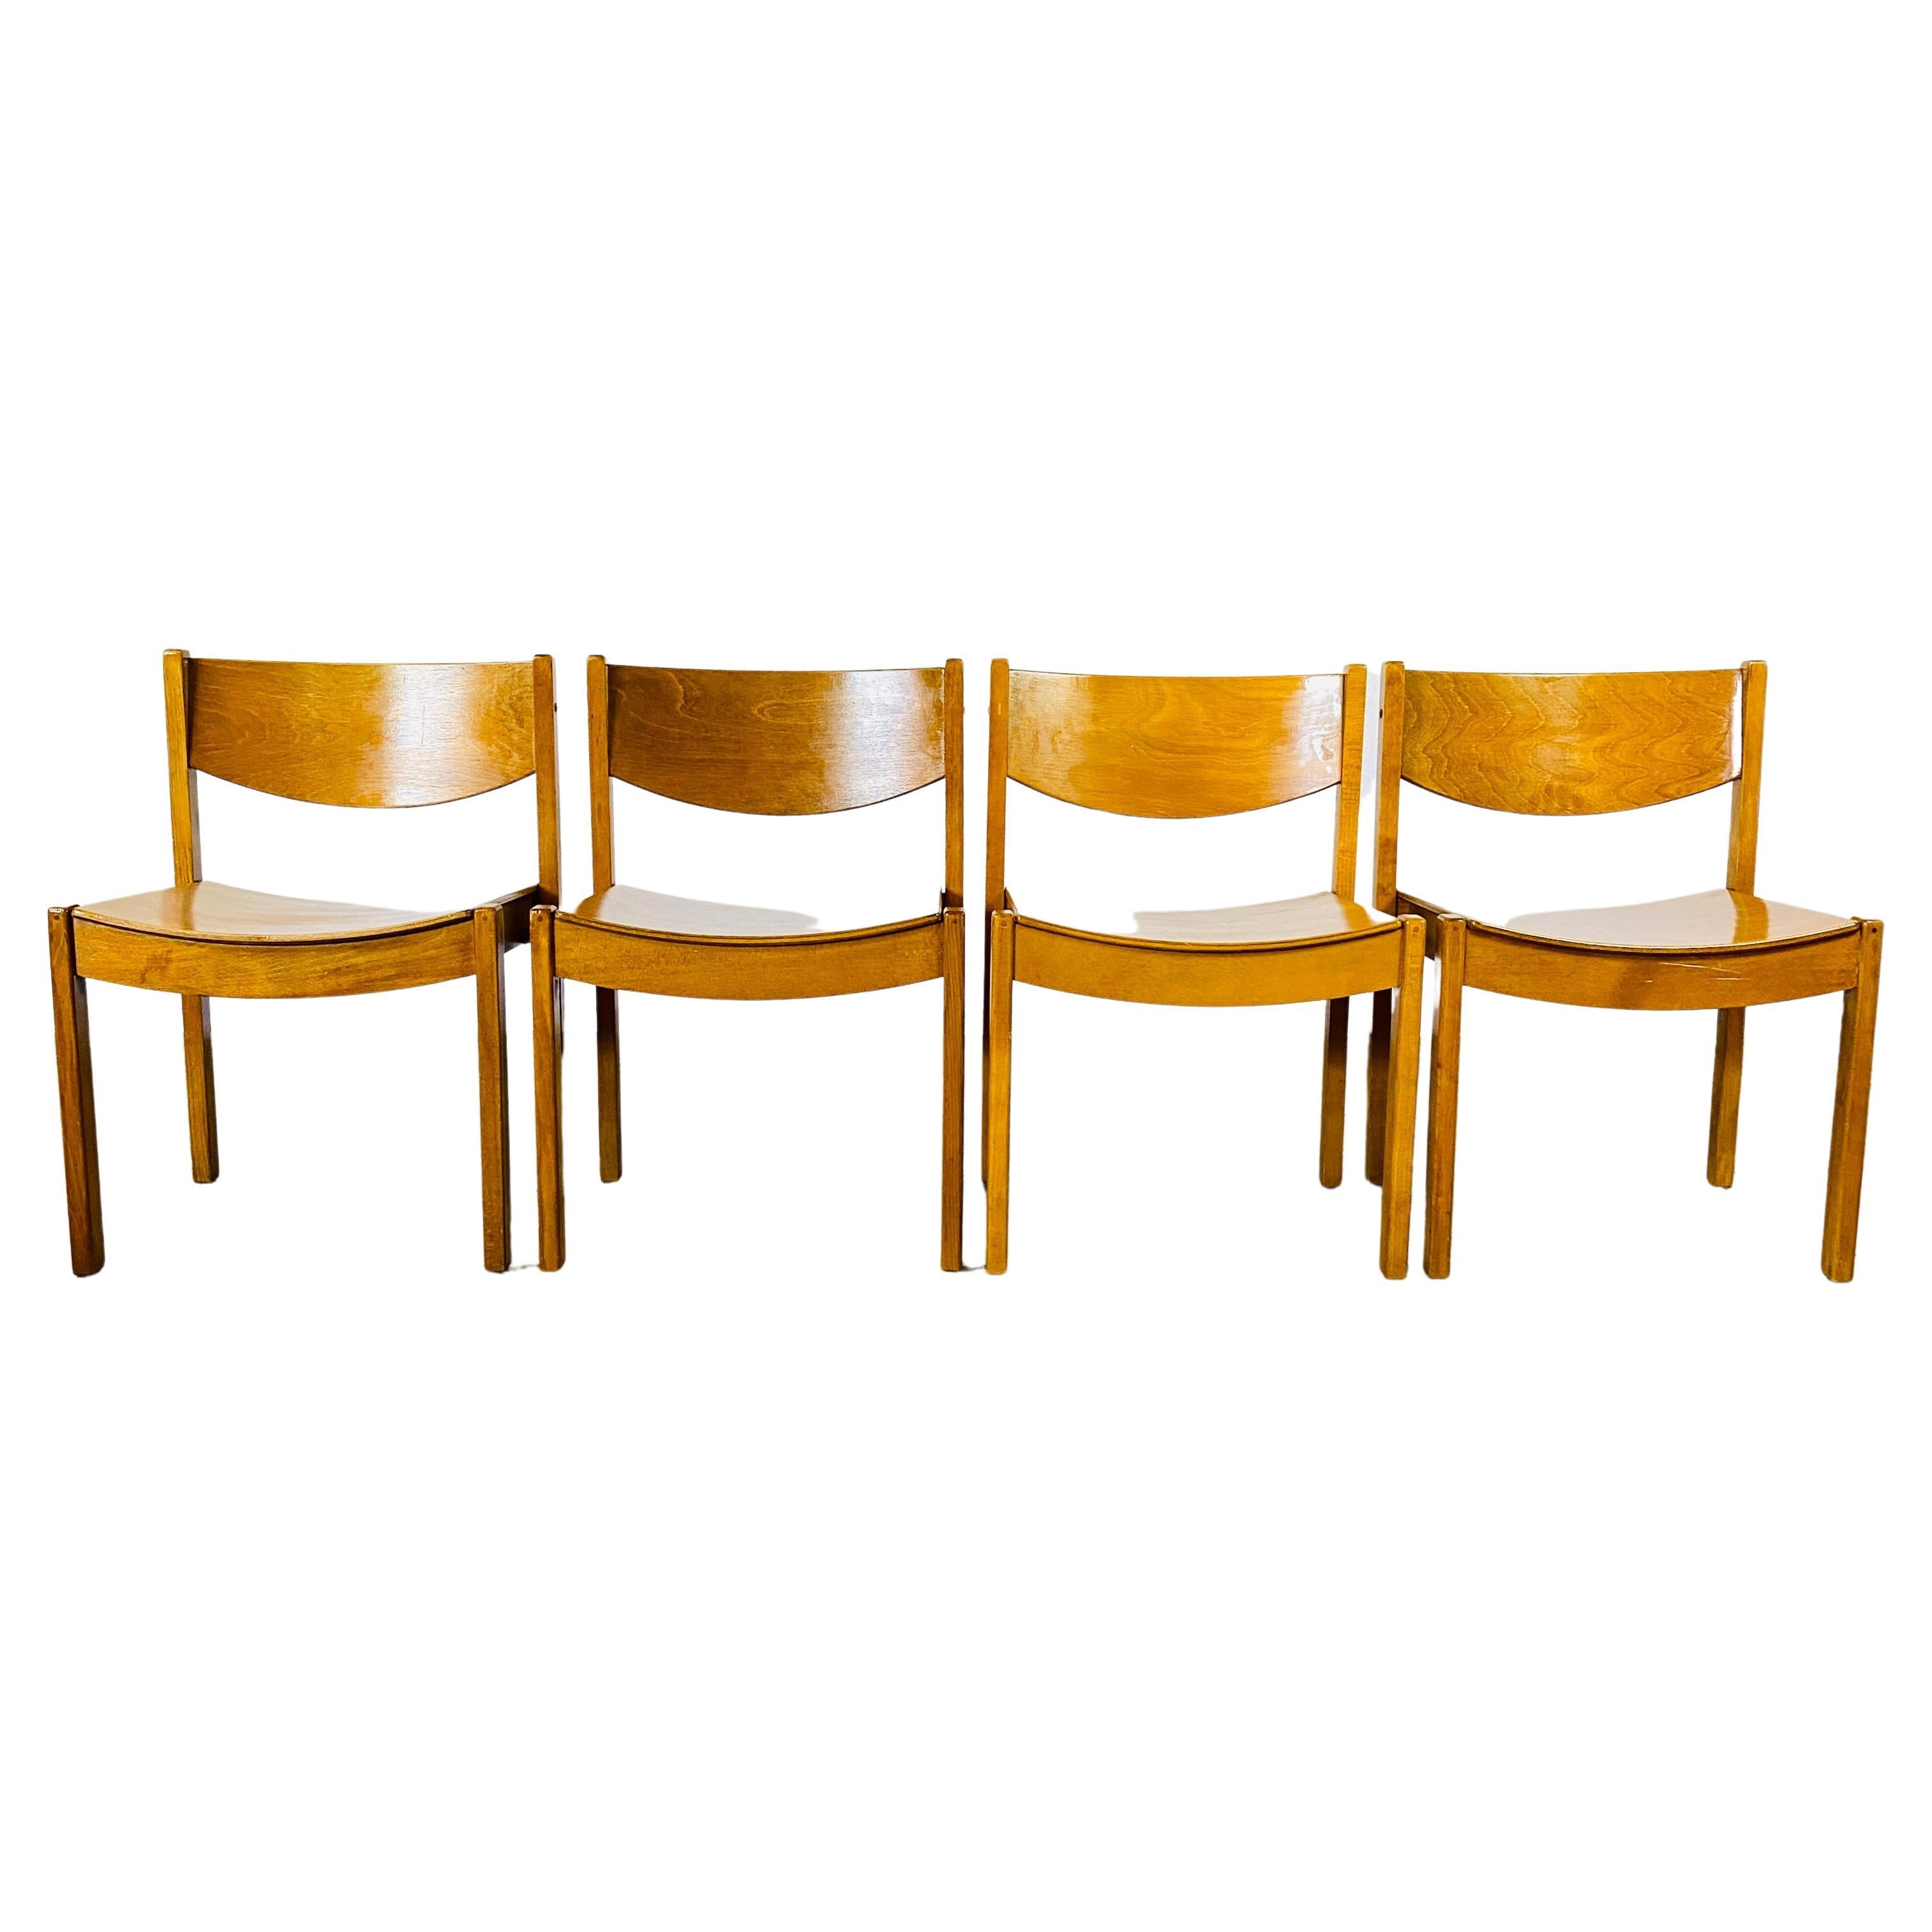 Vintage Modernist Stackable Dining Chairs, Set of 4, 1960s